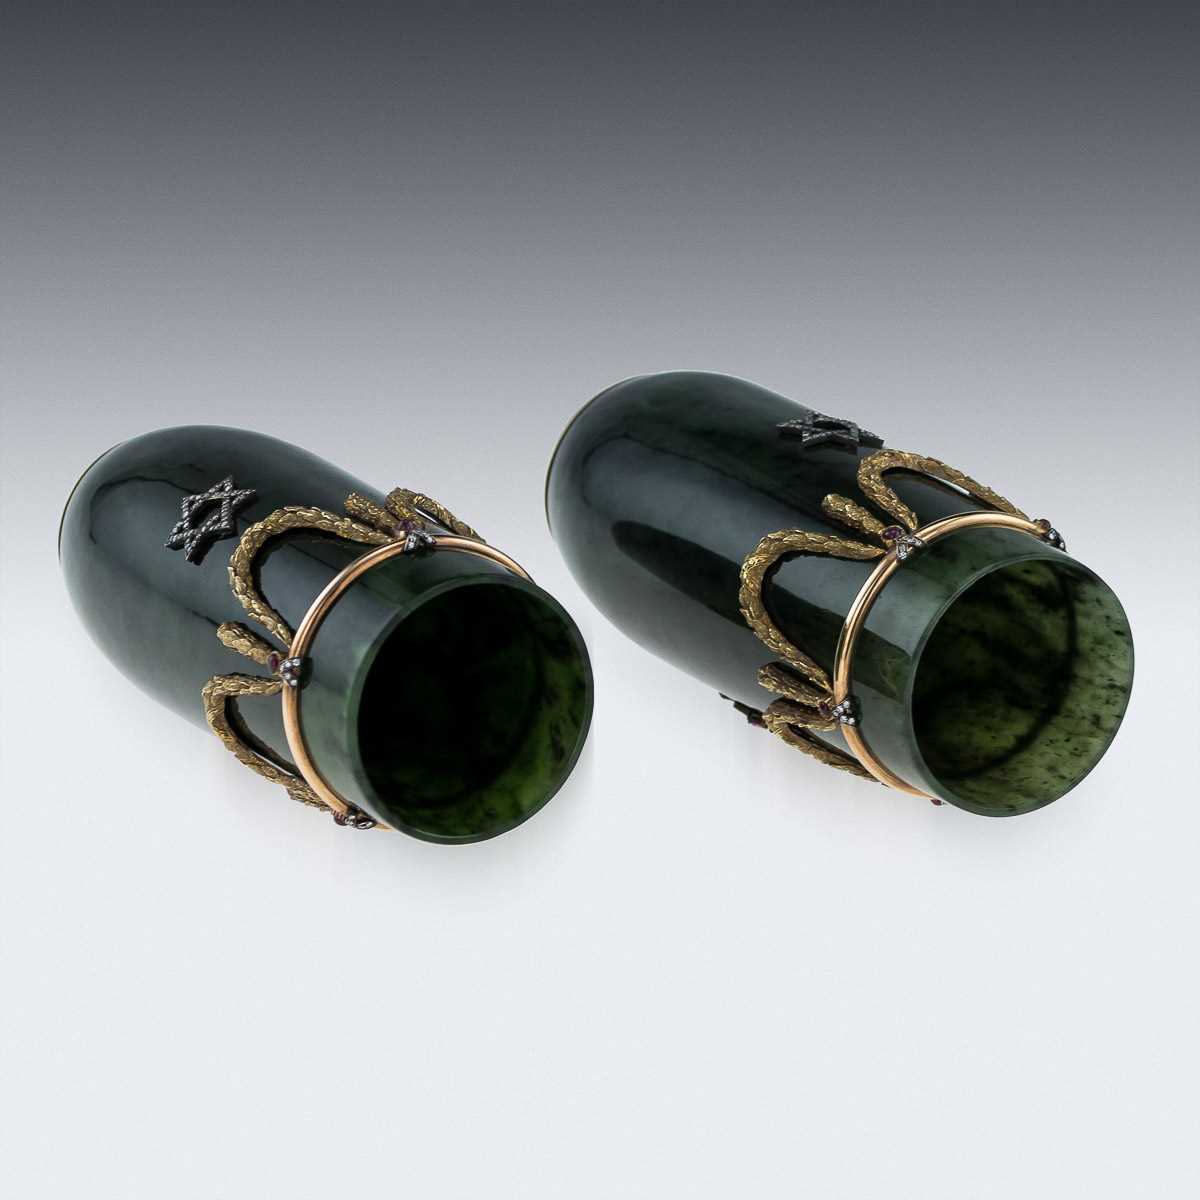 A PAIR 14CT GOLD, NEPHRITE, DIAMOND AND RUBY ENCRUSTED VASES IN THE STYLE OF FABERGE - Image 7 of 15